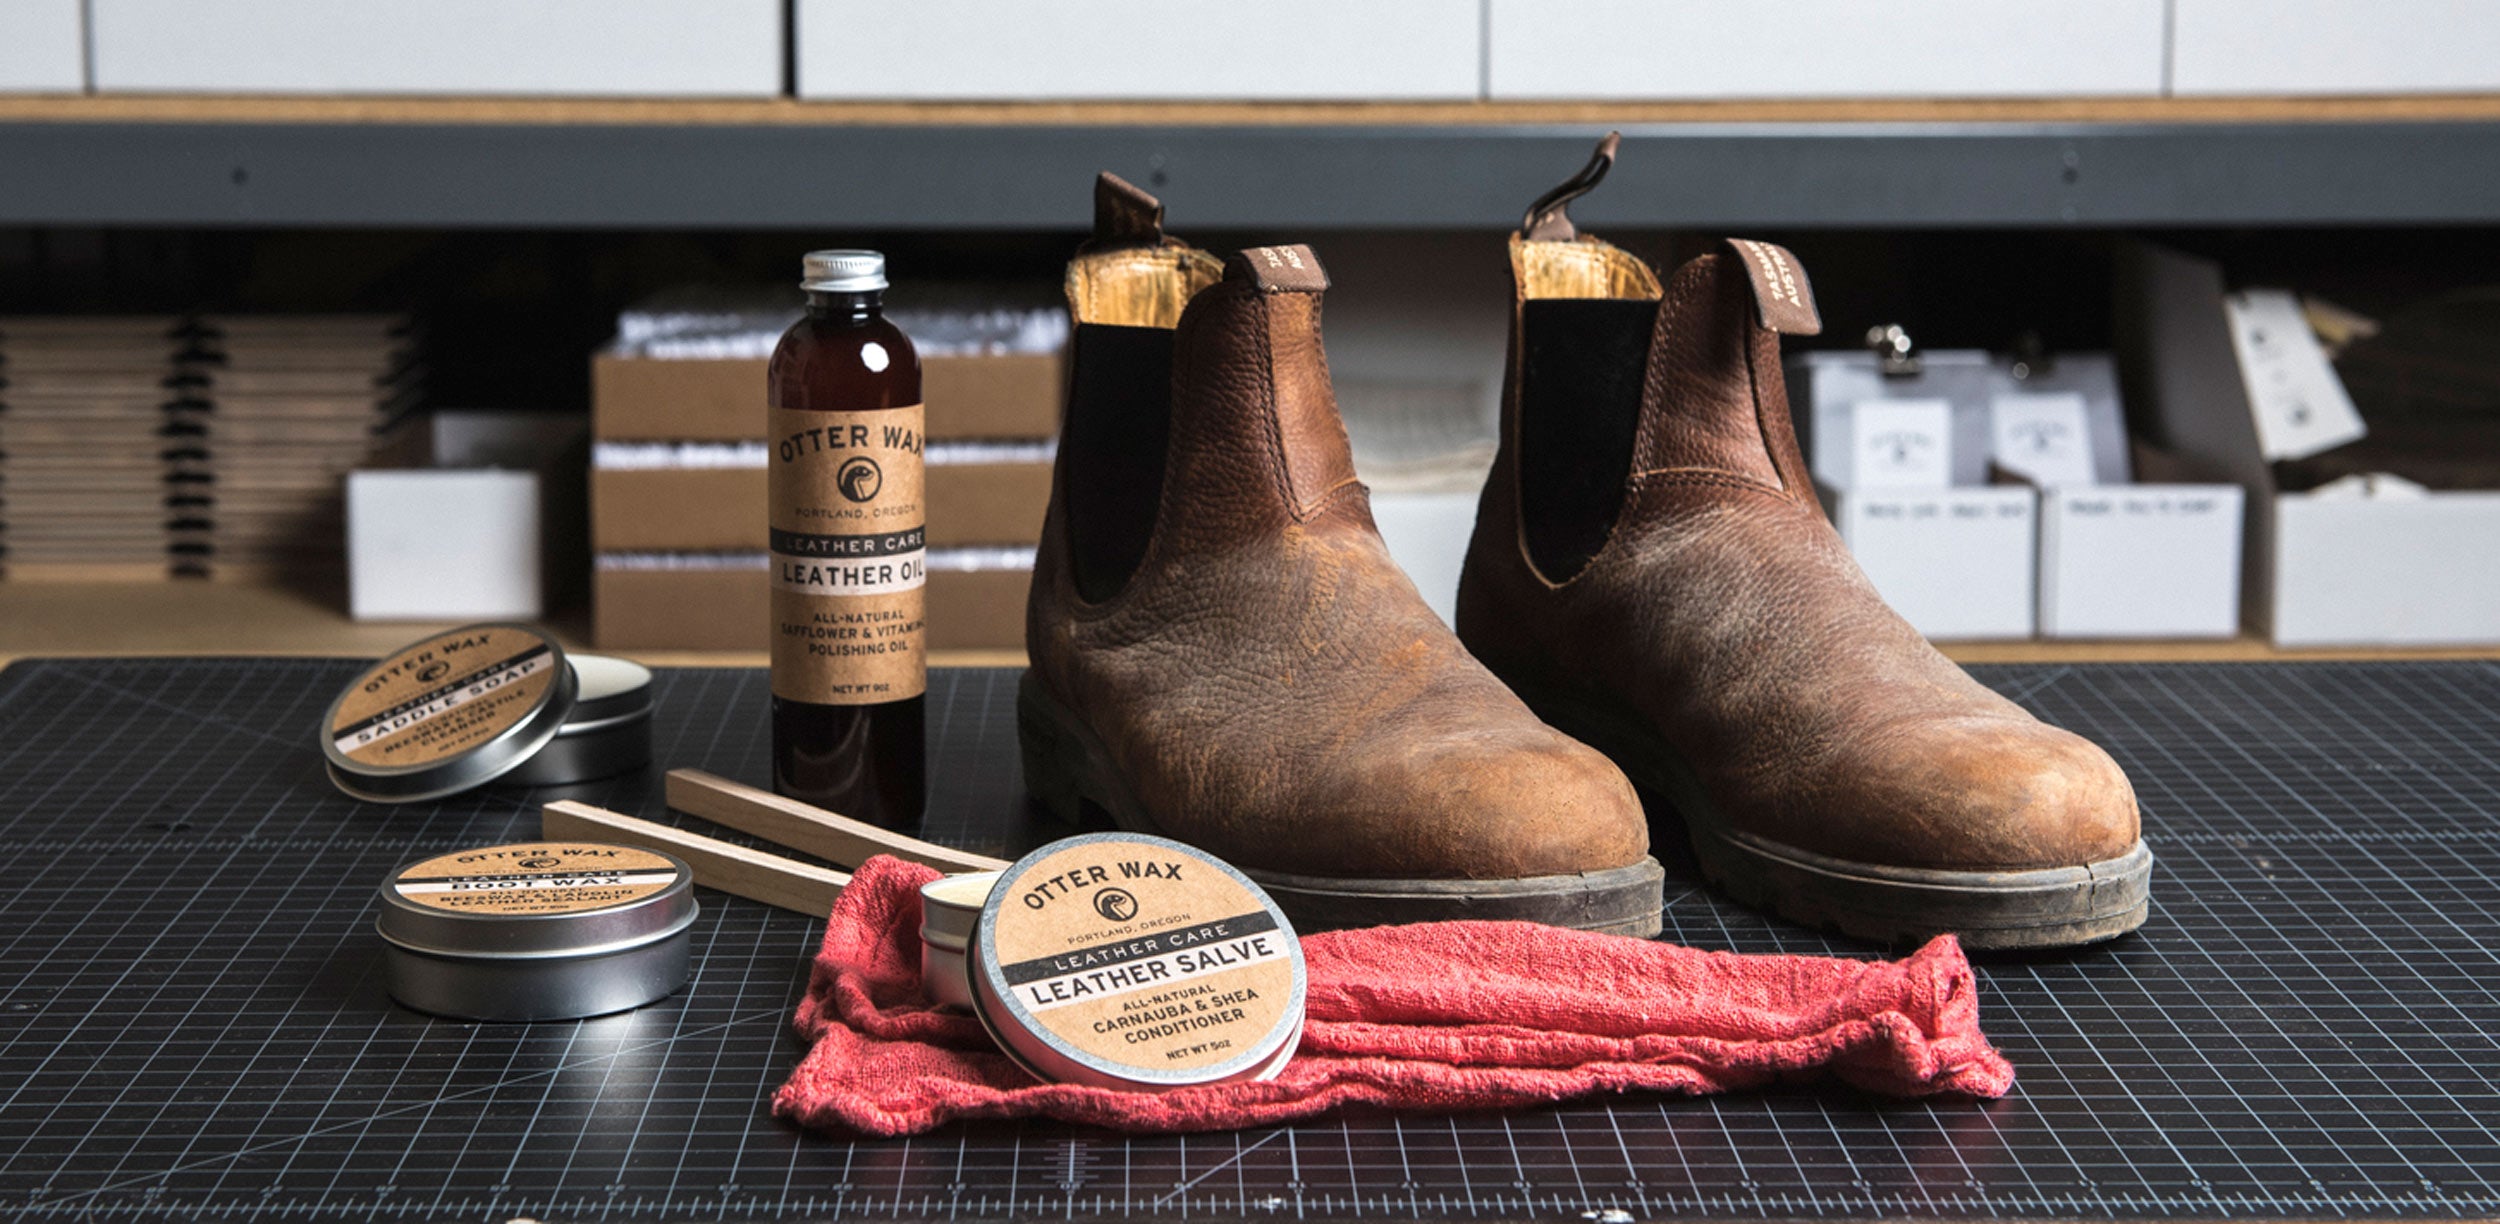 How to Use SADDLE SOAP on Boots  CLEANING Leather Boots 